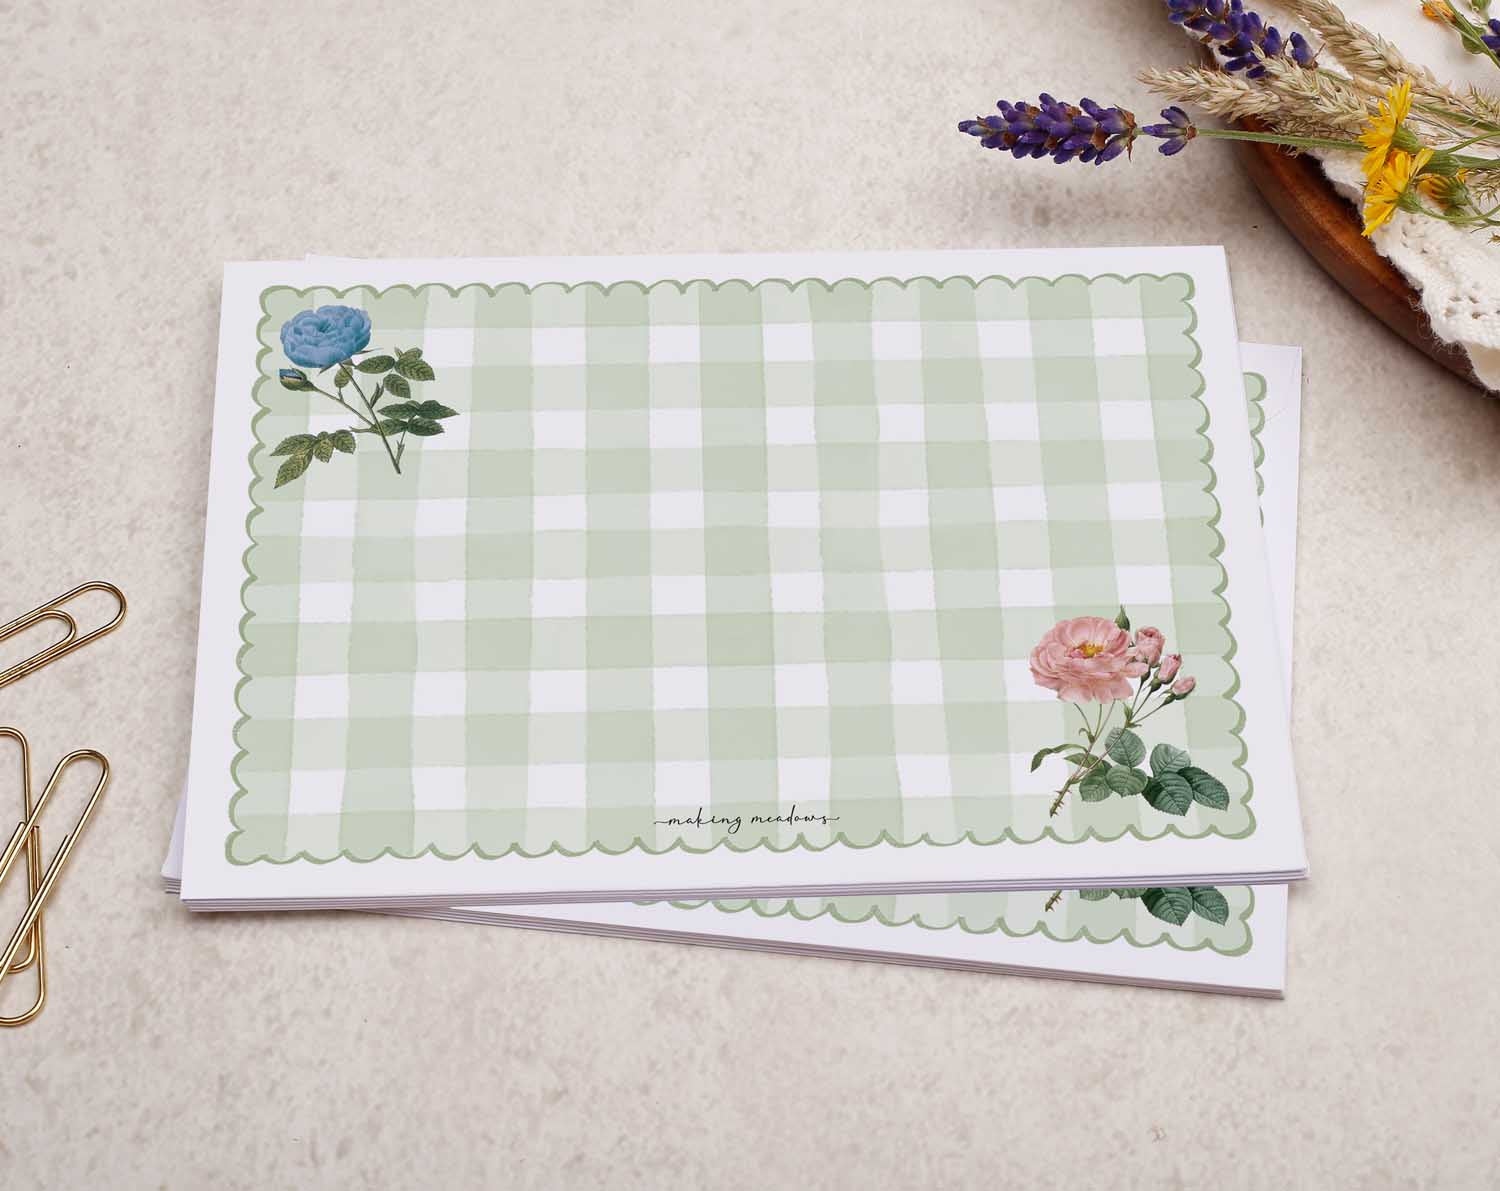 traditional flowers, green gingham A5 writing paper set comes with matching envelopes